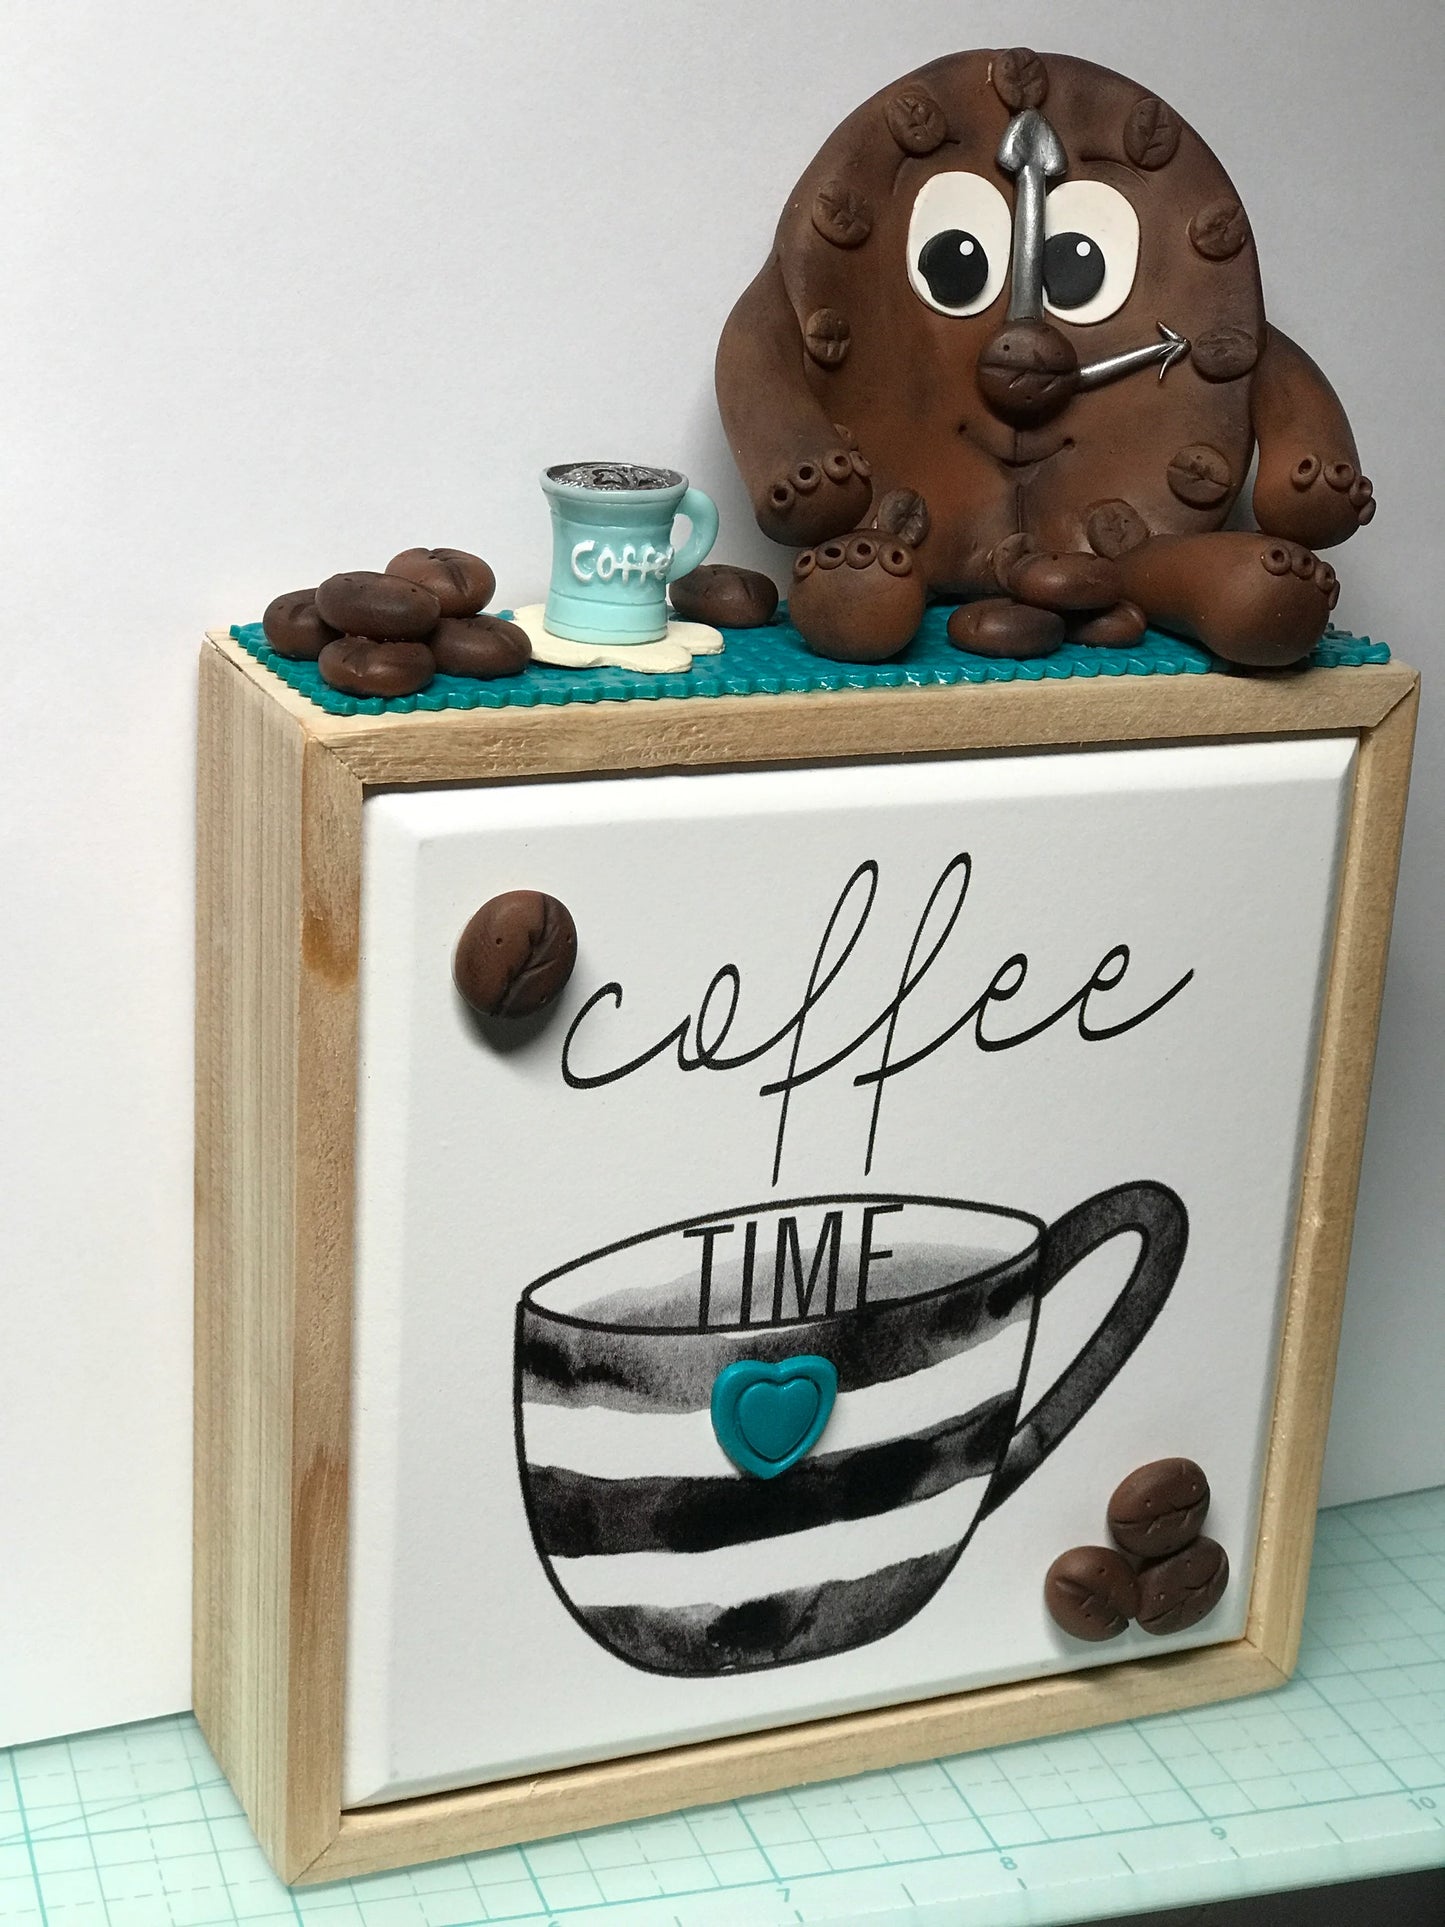 Coffee Time! Clay Coffee Bean with Clock Face Shows It’s Always Coffee Time - Coffee Humor, Coffee Bar, Coffee Nook Decor, Funny Collectible